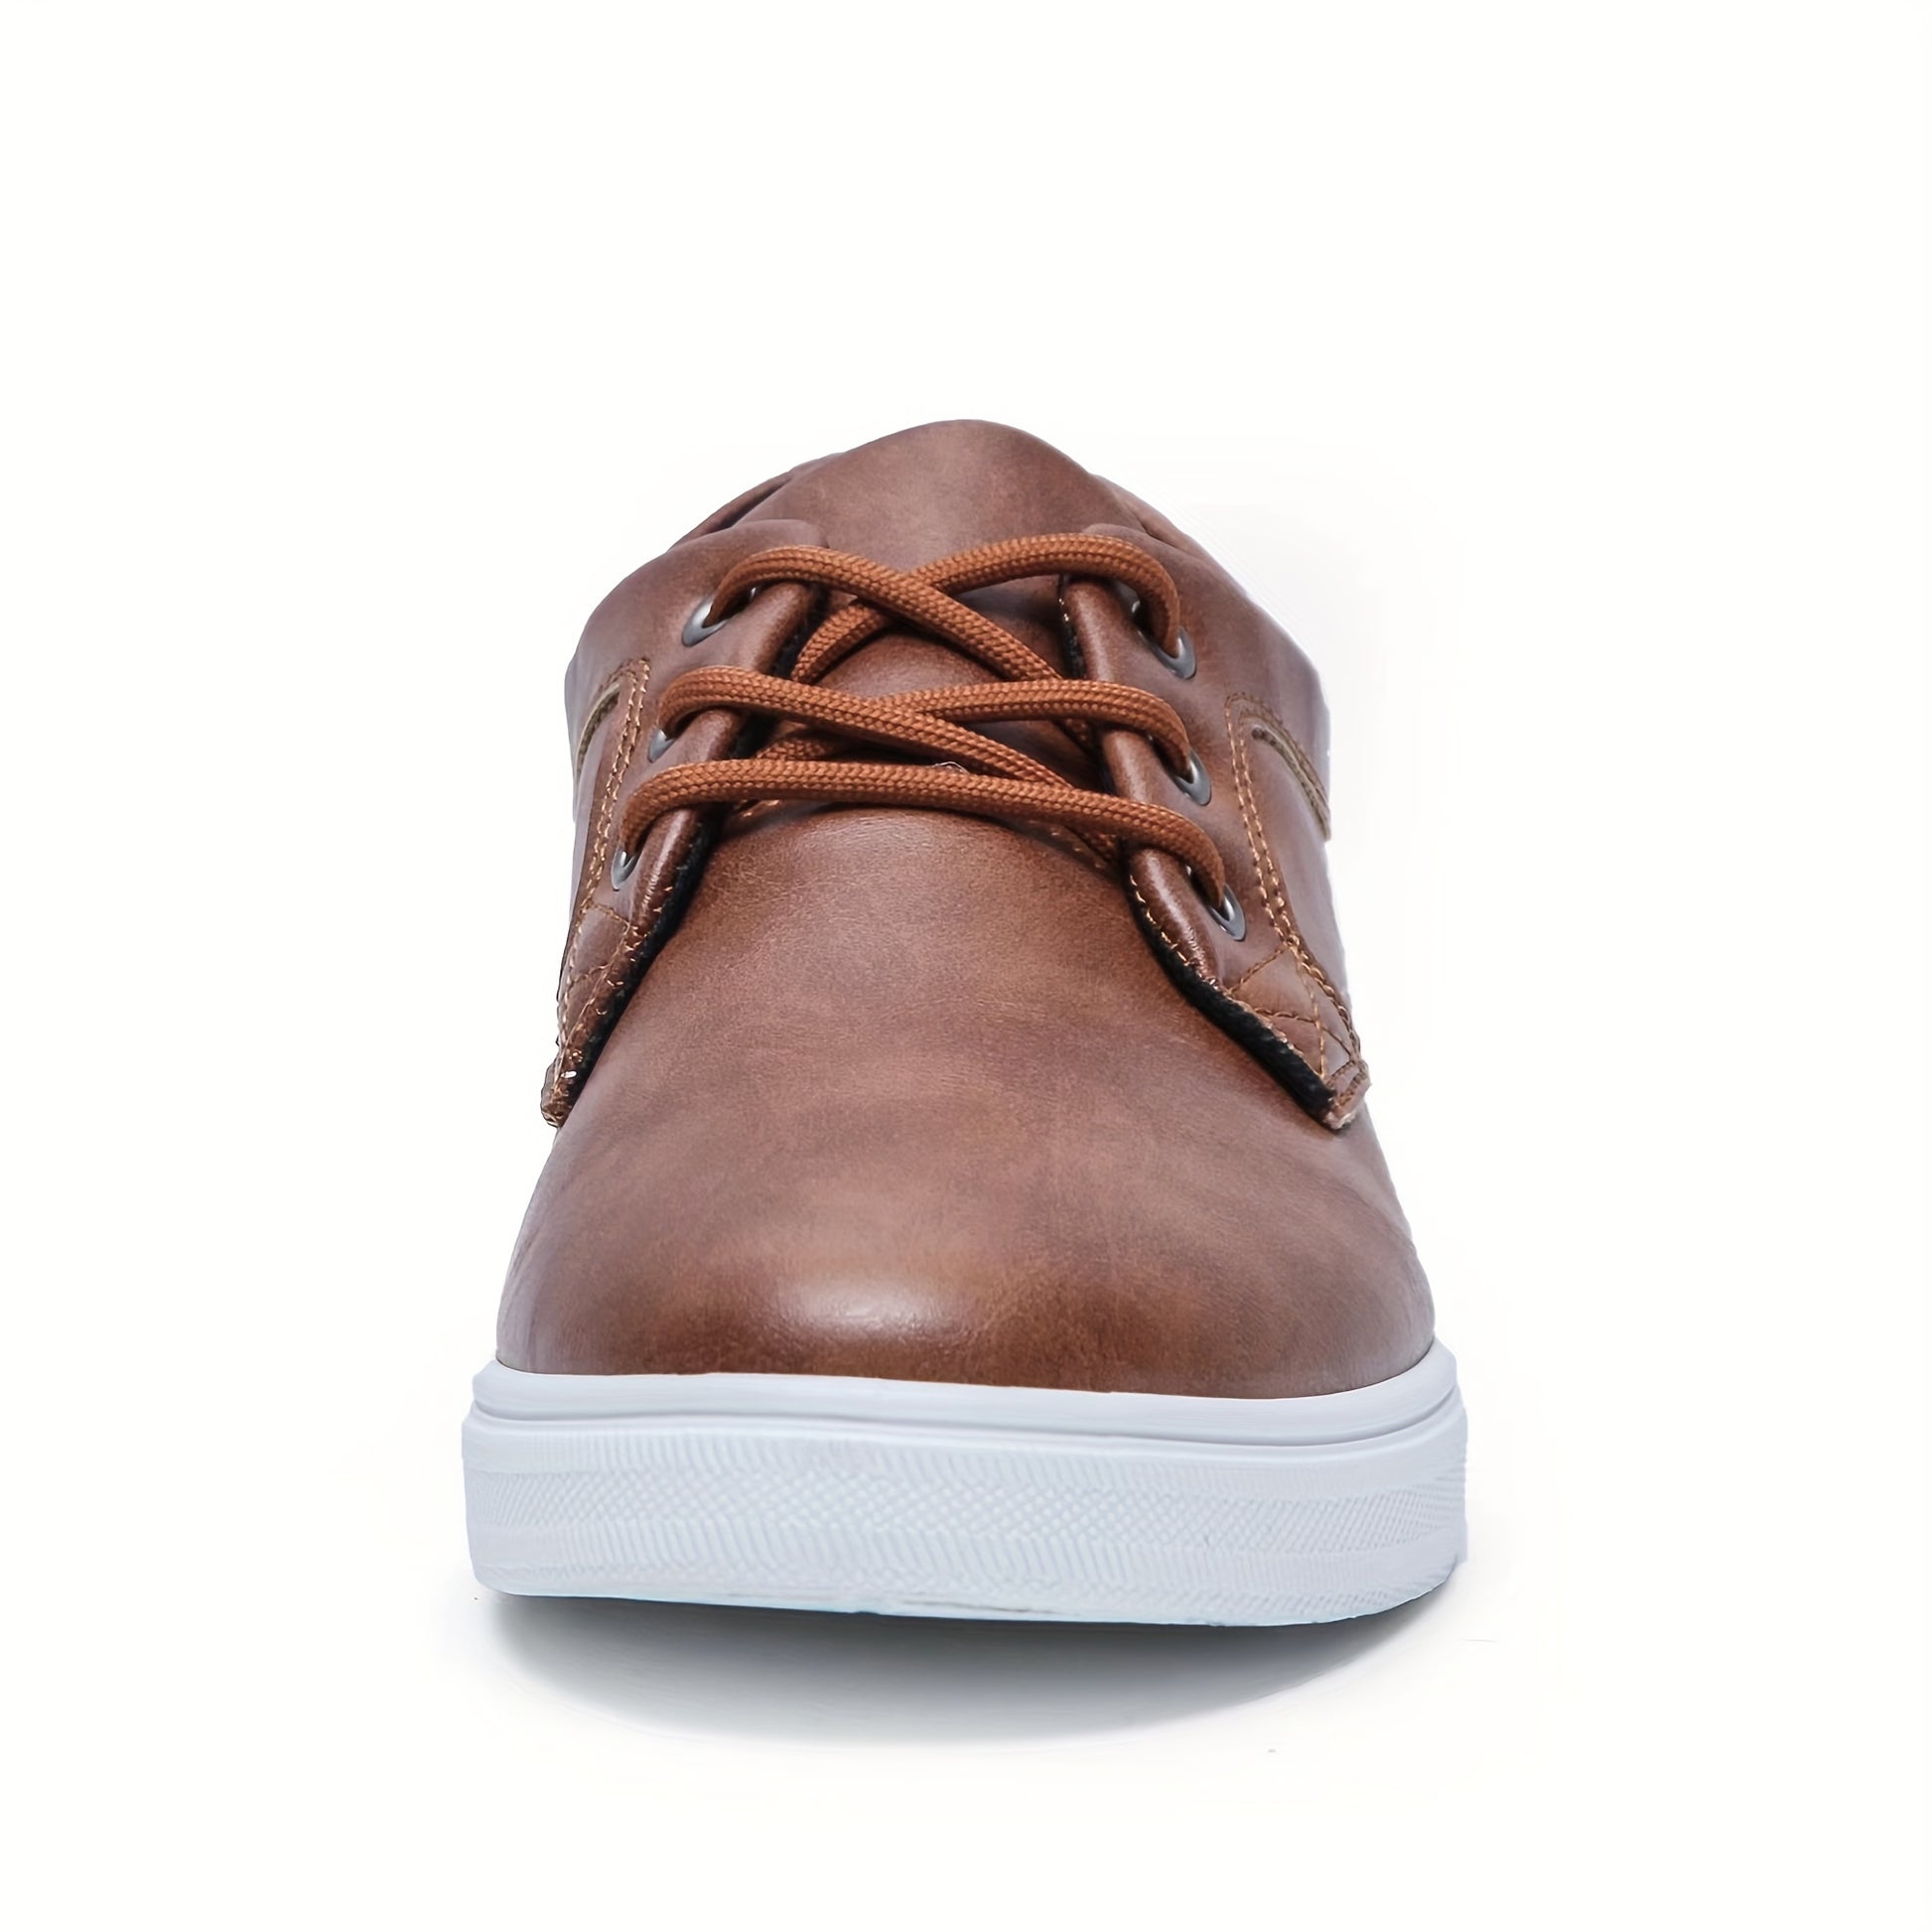 Modern Men's Skate-Inspired Shoes: Durable PU Leather, Breathable Design, Enhanced Traction - Men's Shoes-CasualFlowshop 